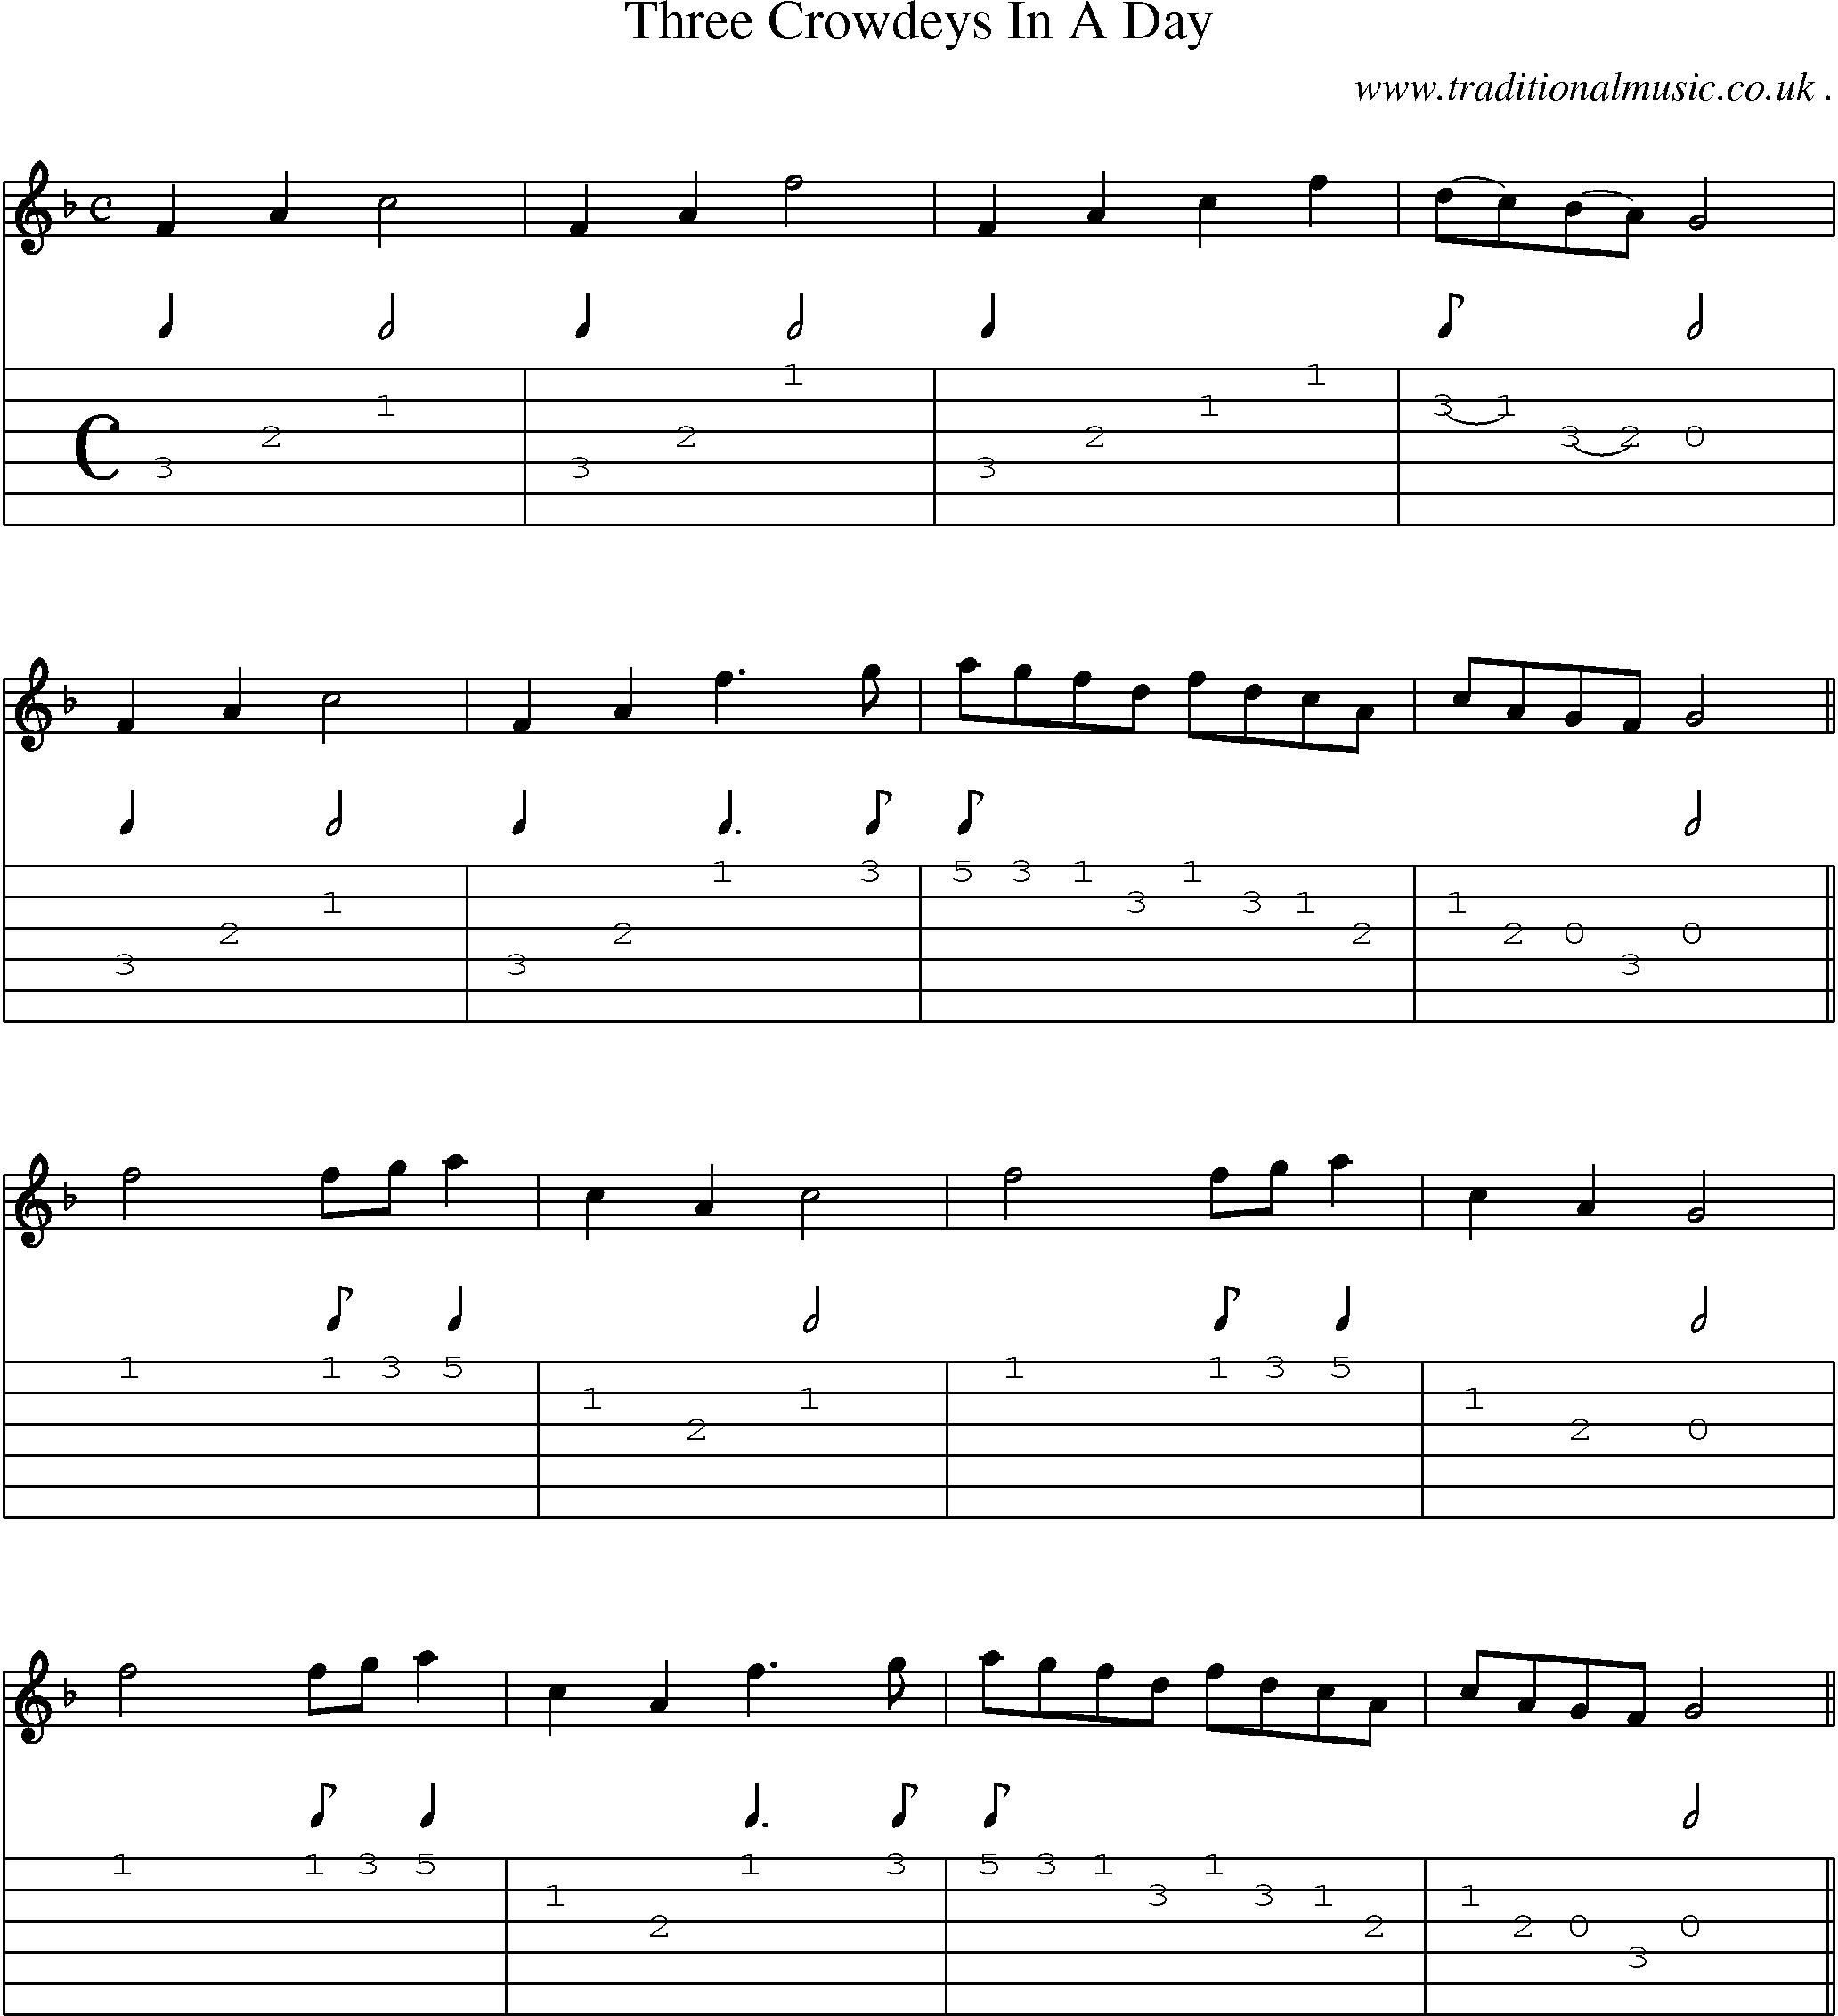 Sheet-Music and Guitar Tabs for Three Crowdeys In A Day